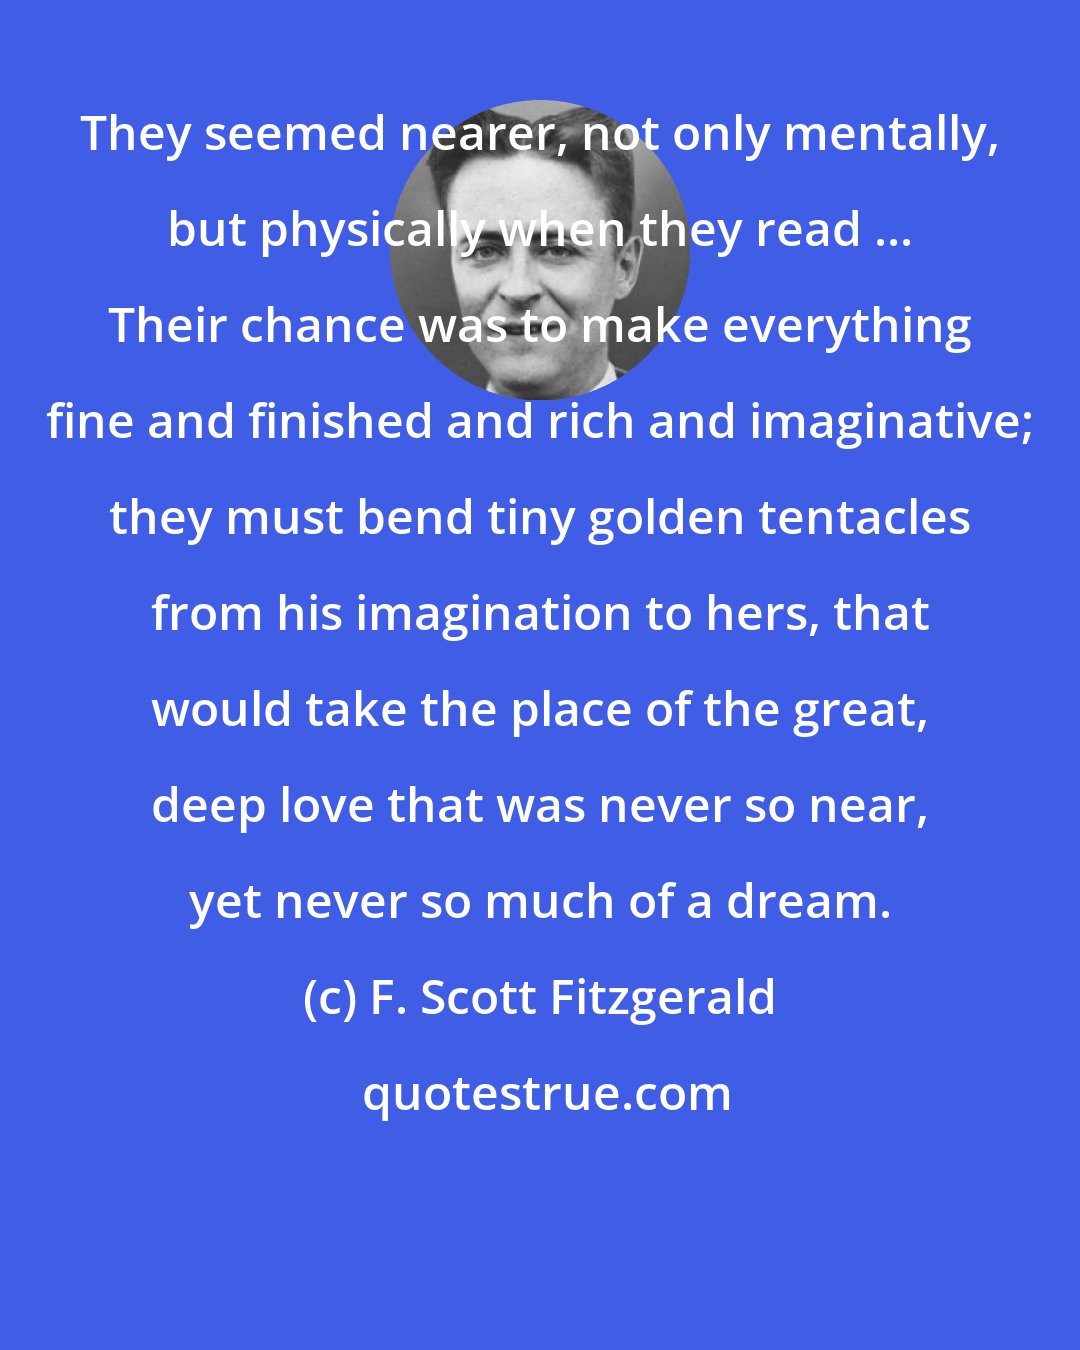 F. Scott Fitzgerald: They seemed nearer, not only mentally, but physically when they read ... Their chance was to make everything fine and finished and rich and imaginative; they must bend tiny golden tentacles from his imagination to hers, that would take the place of the great, deep love that was never so near, yet never so much of a dream.